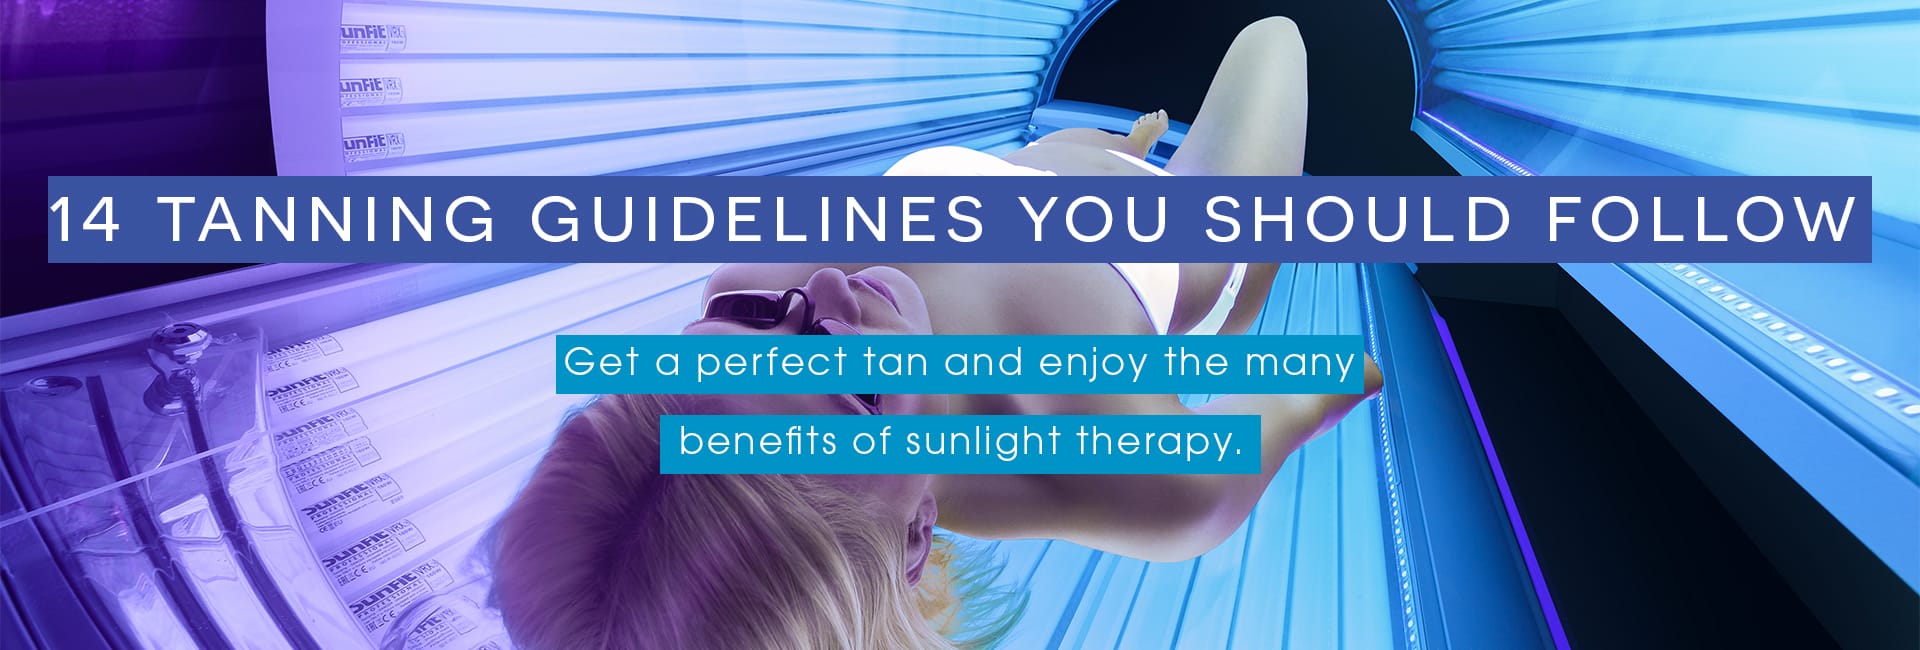 tanning guidelines